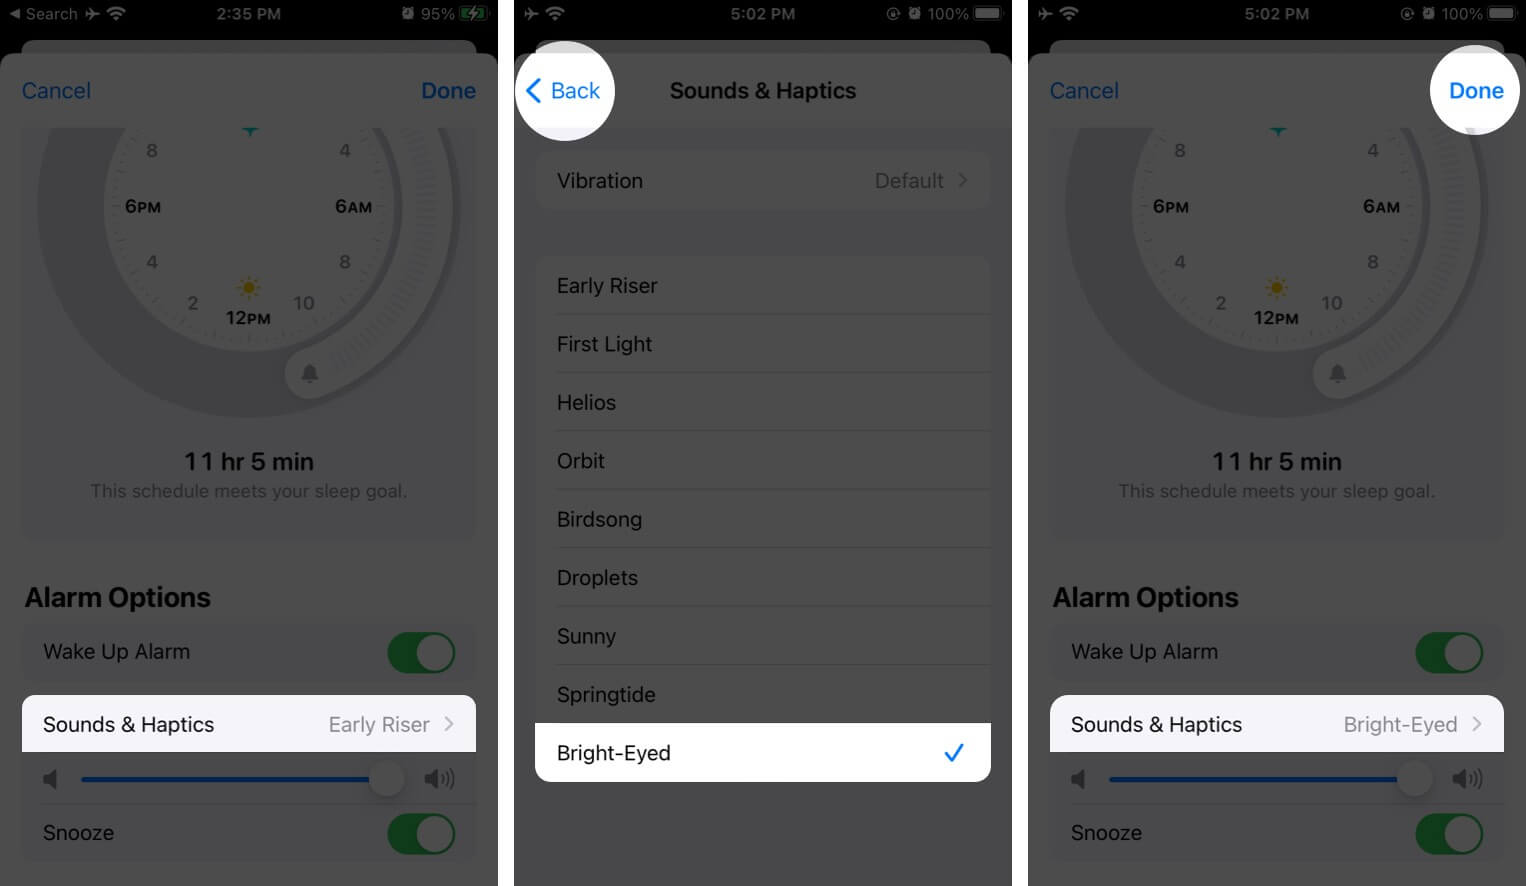 Tap on Sound & Haptics and Select Sound to Change Bedtime Alarm Sound on iPhone